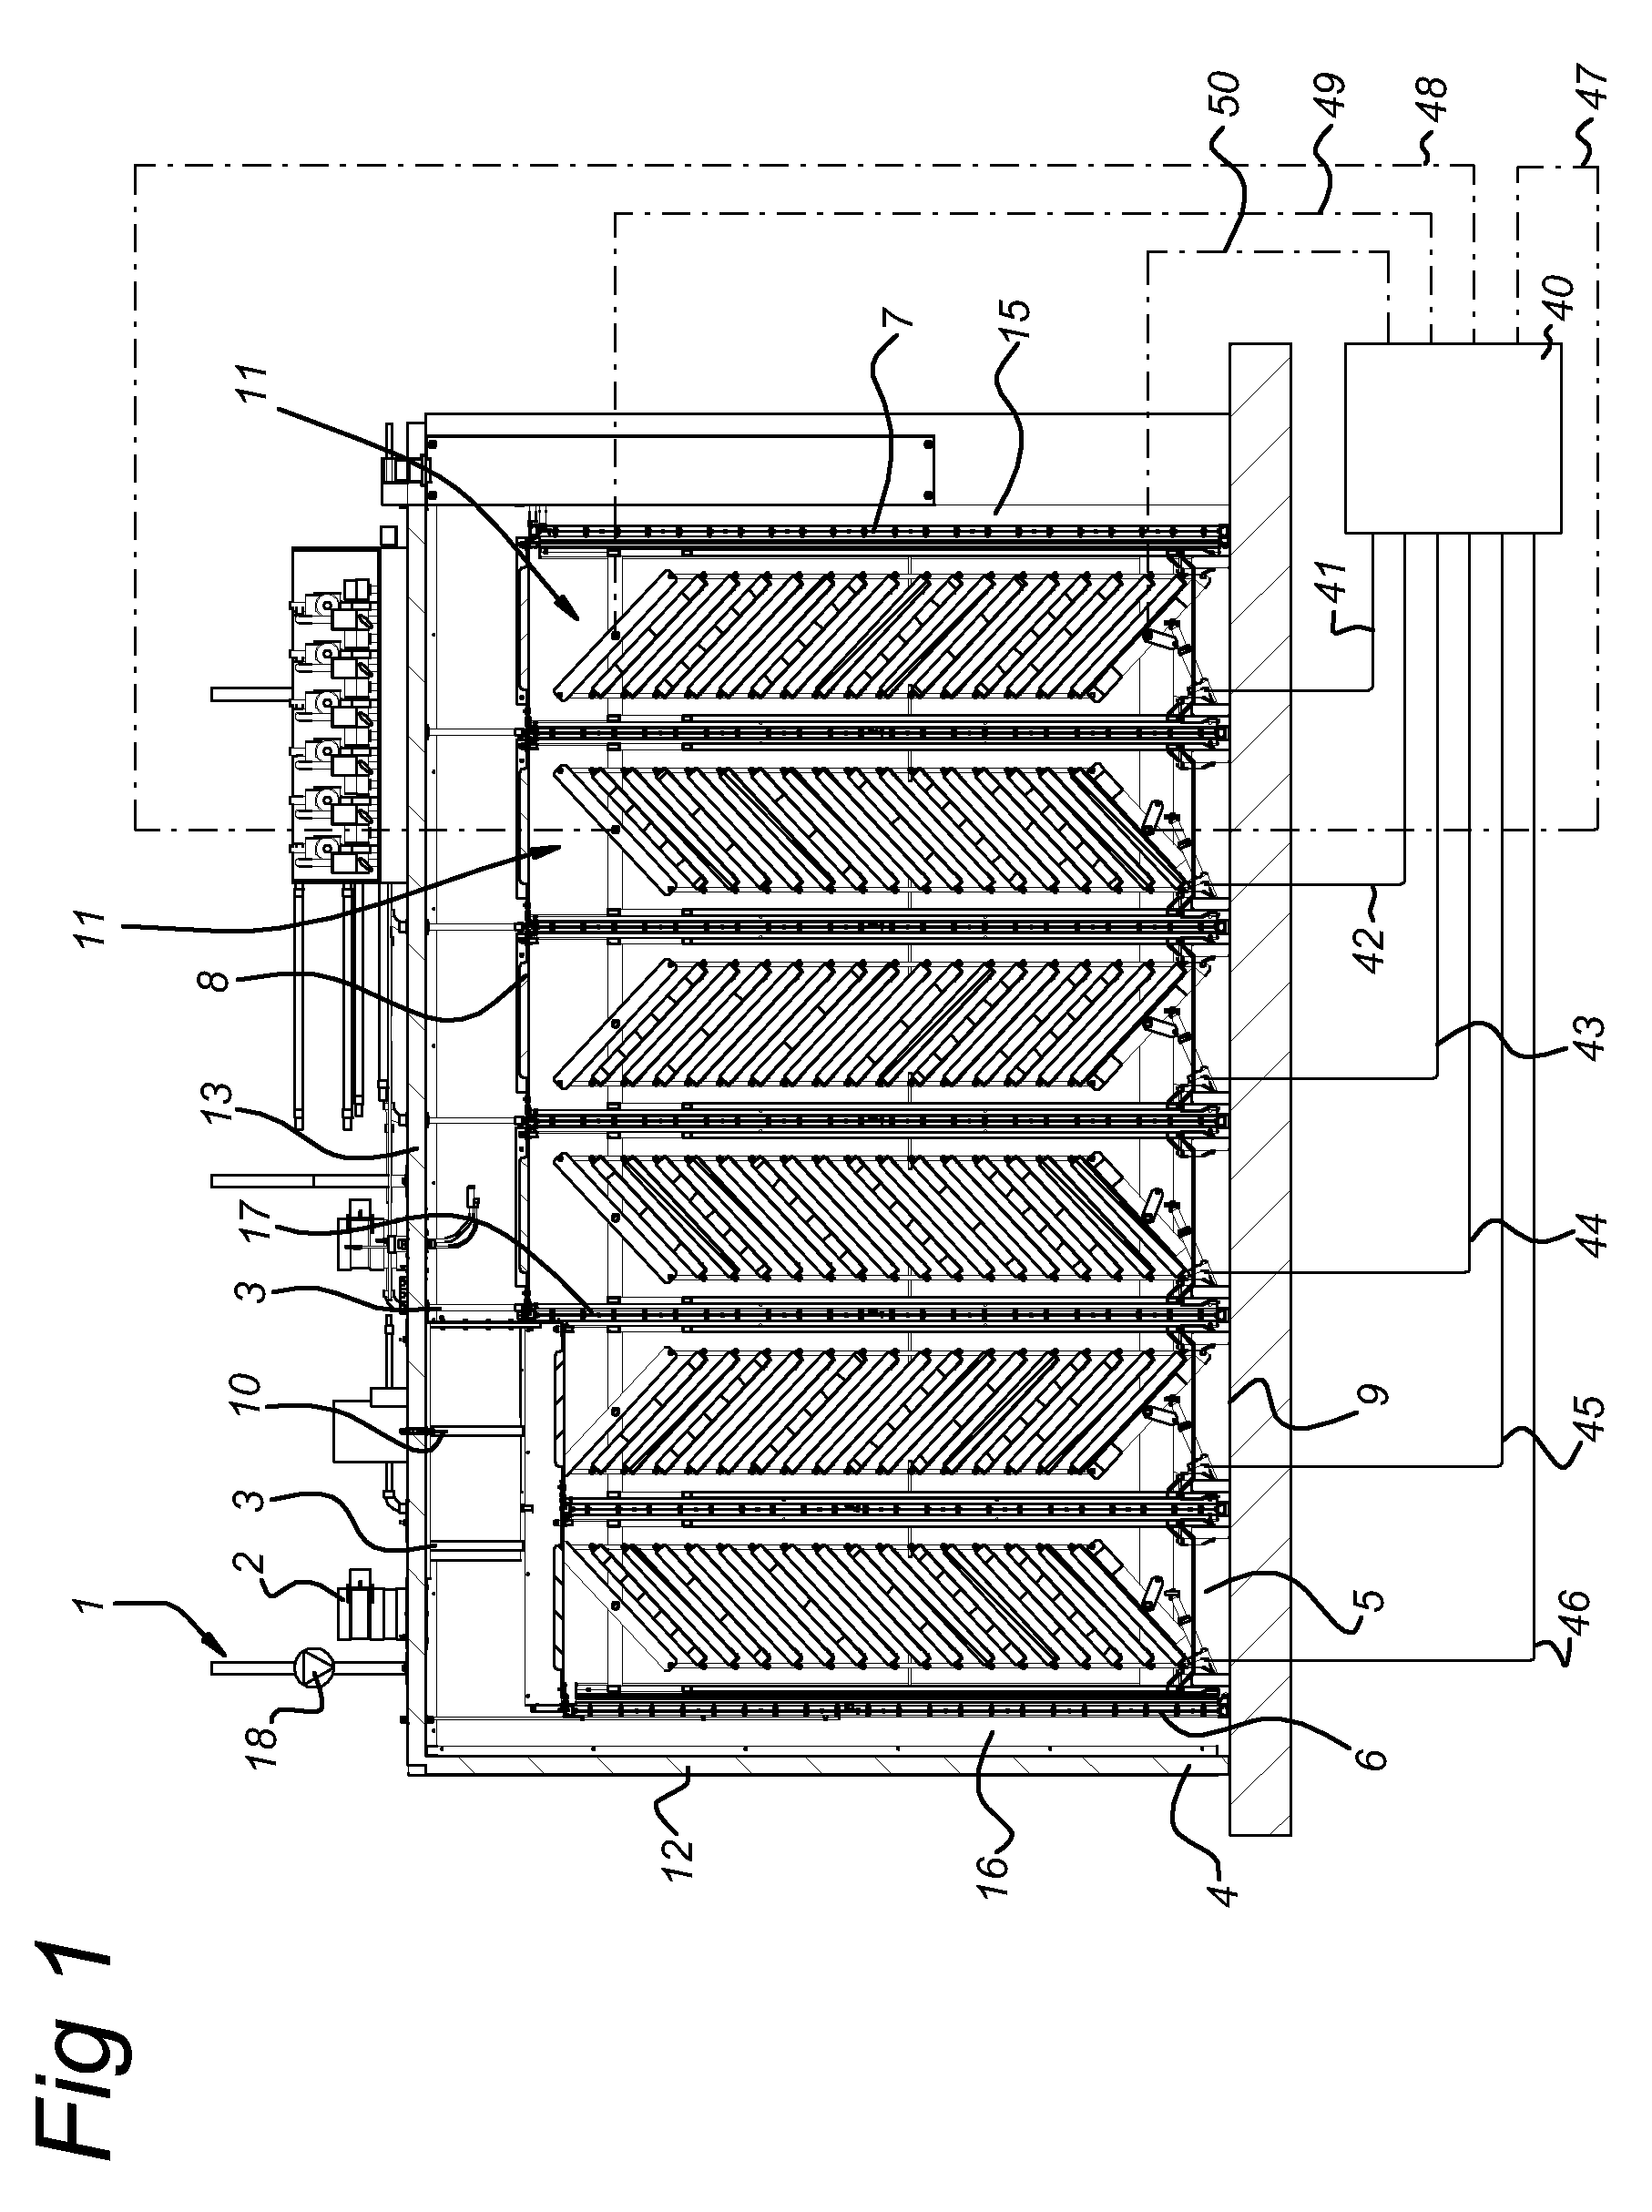 Method and device for the incubation of eggs